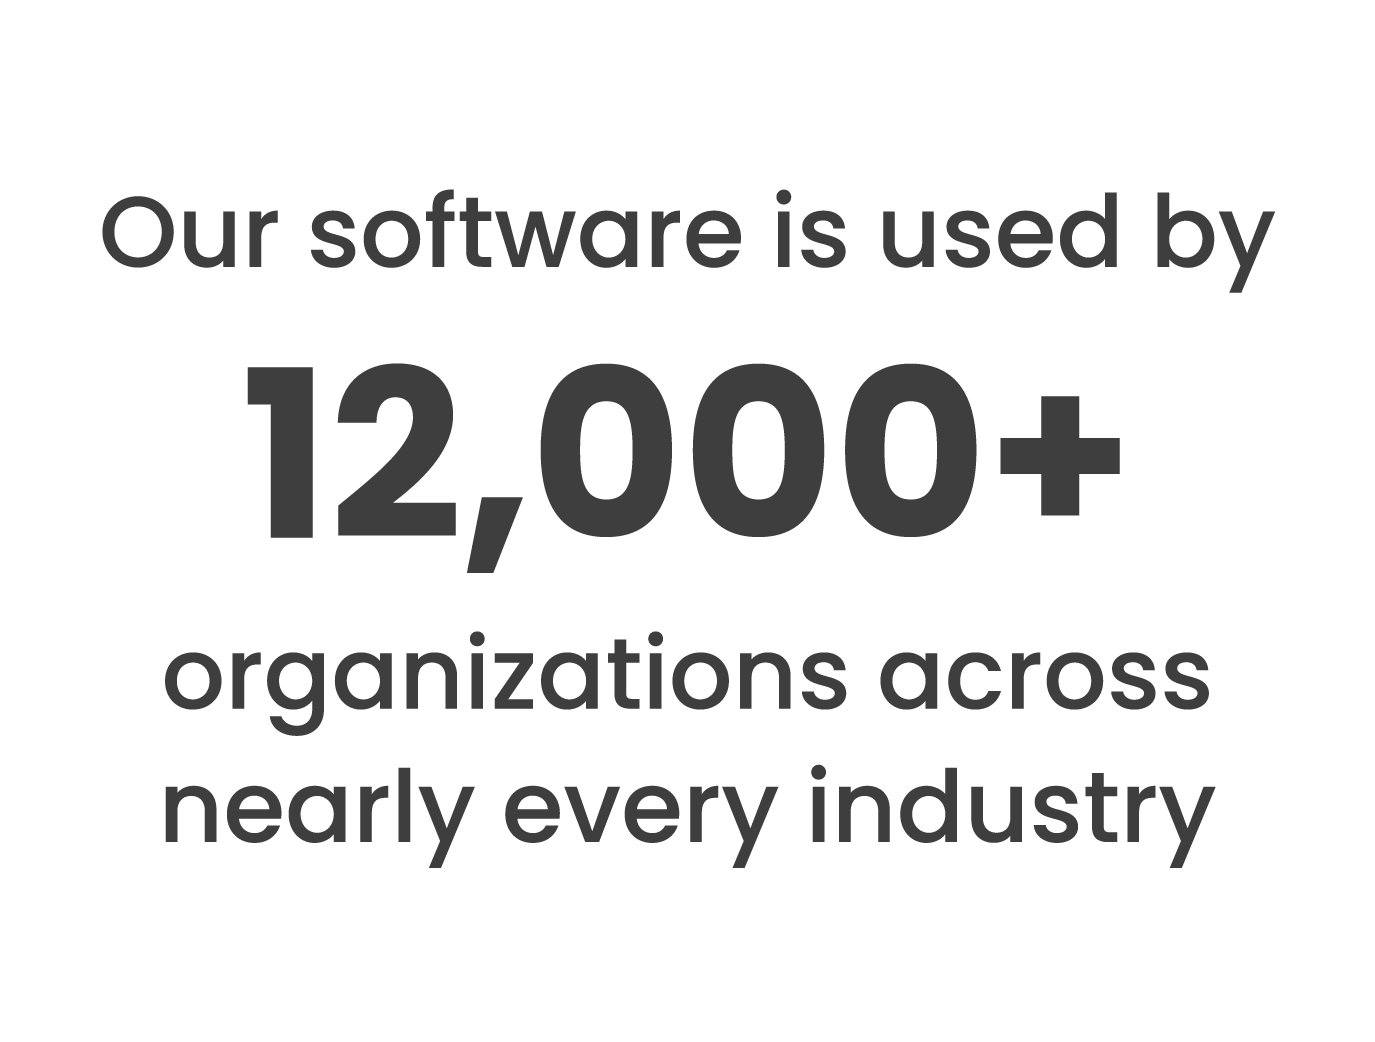 Our software is used by more than 12,000 organizations across nearly every industry